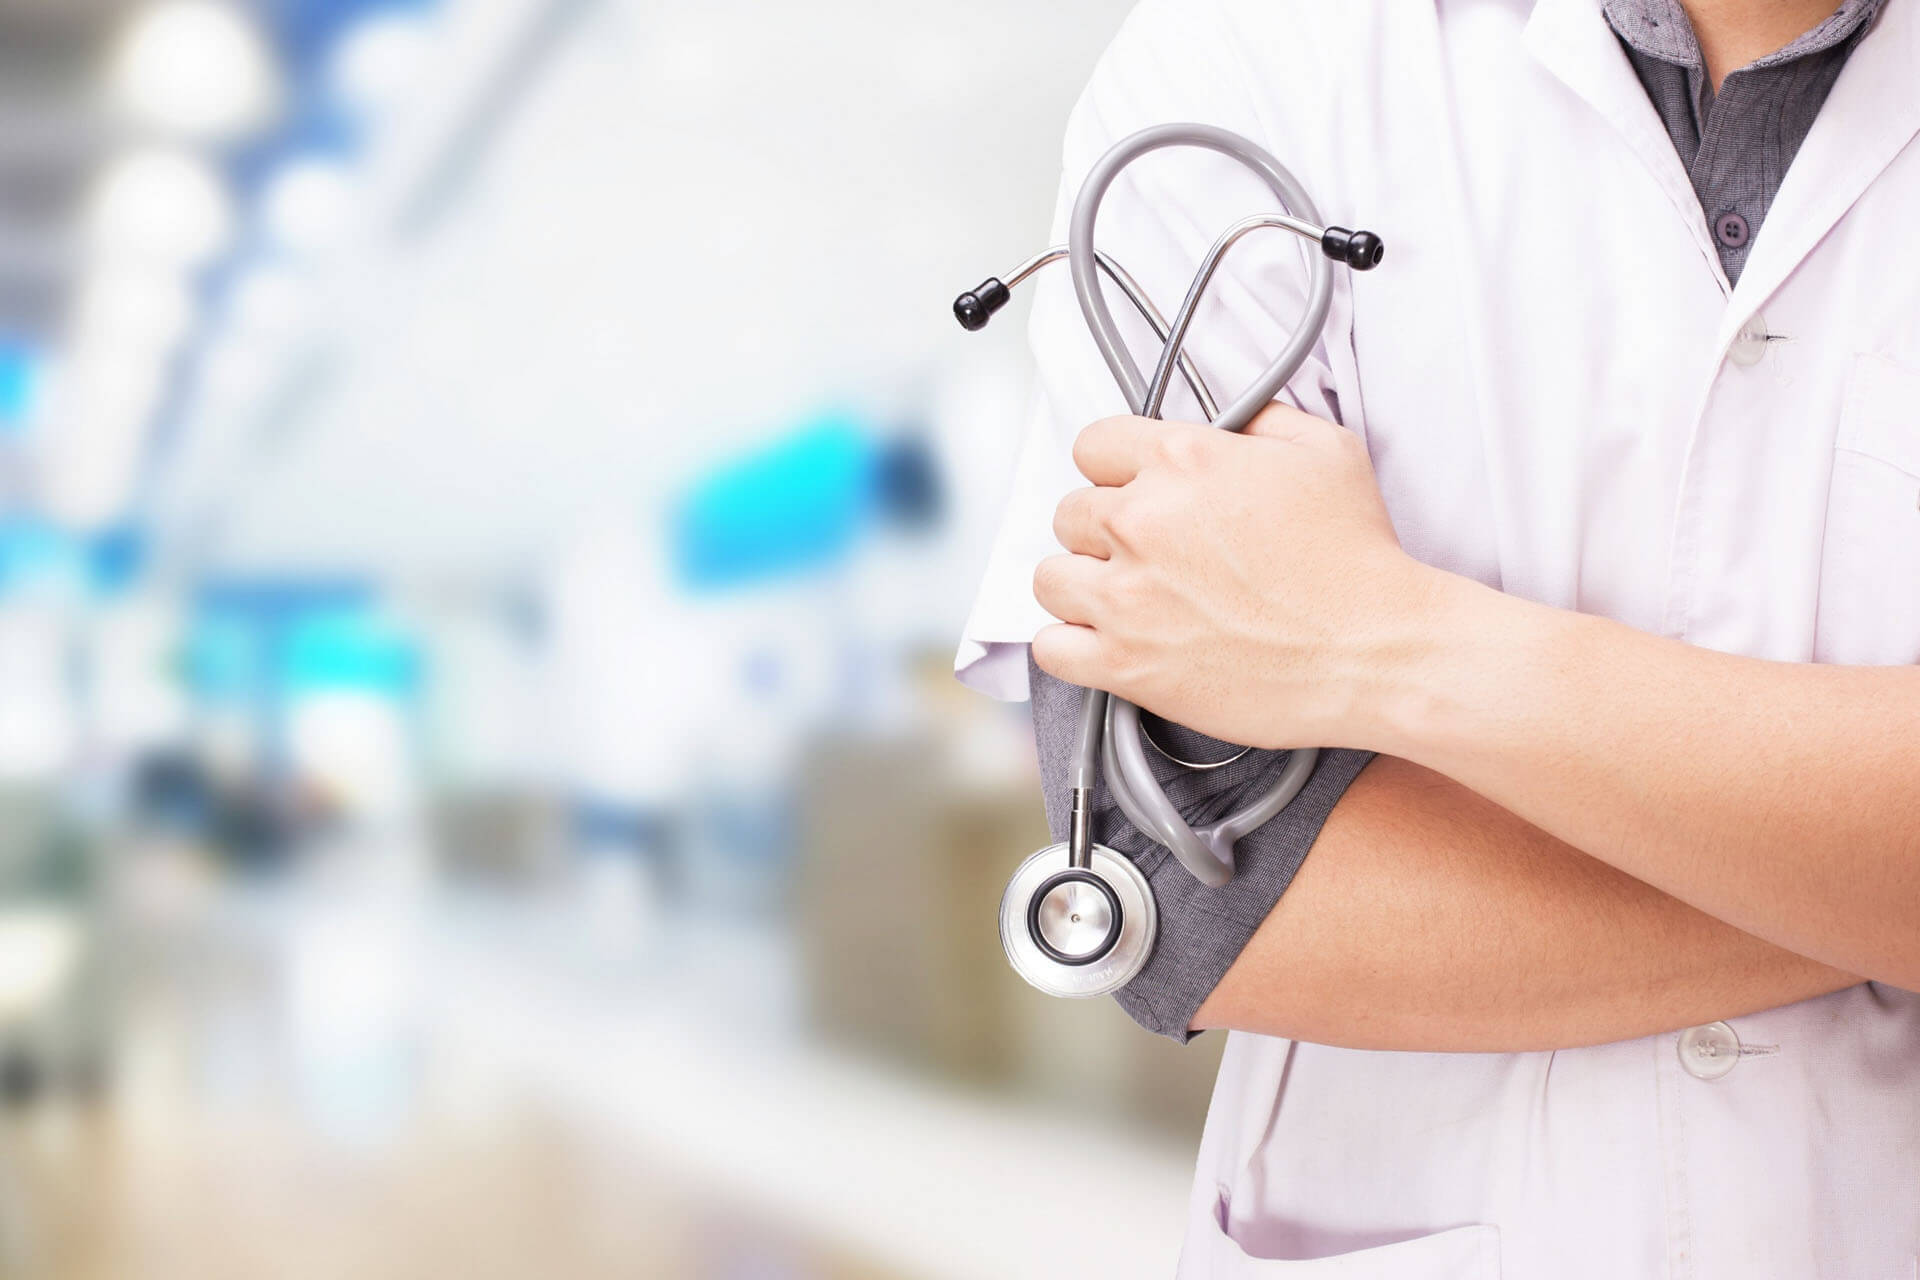 doctor-with-stethoscope-hands-hospital-background (1)